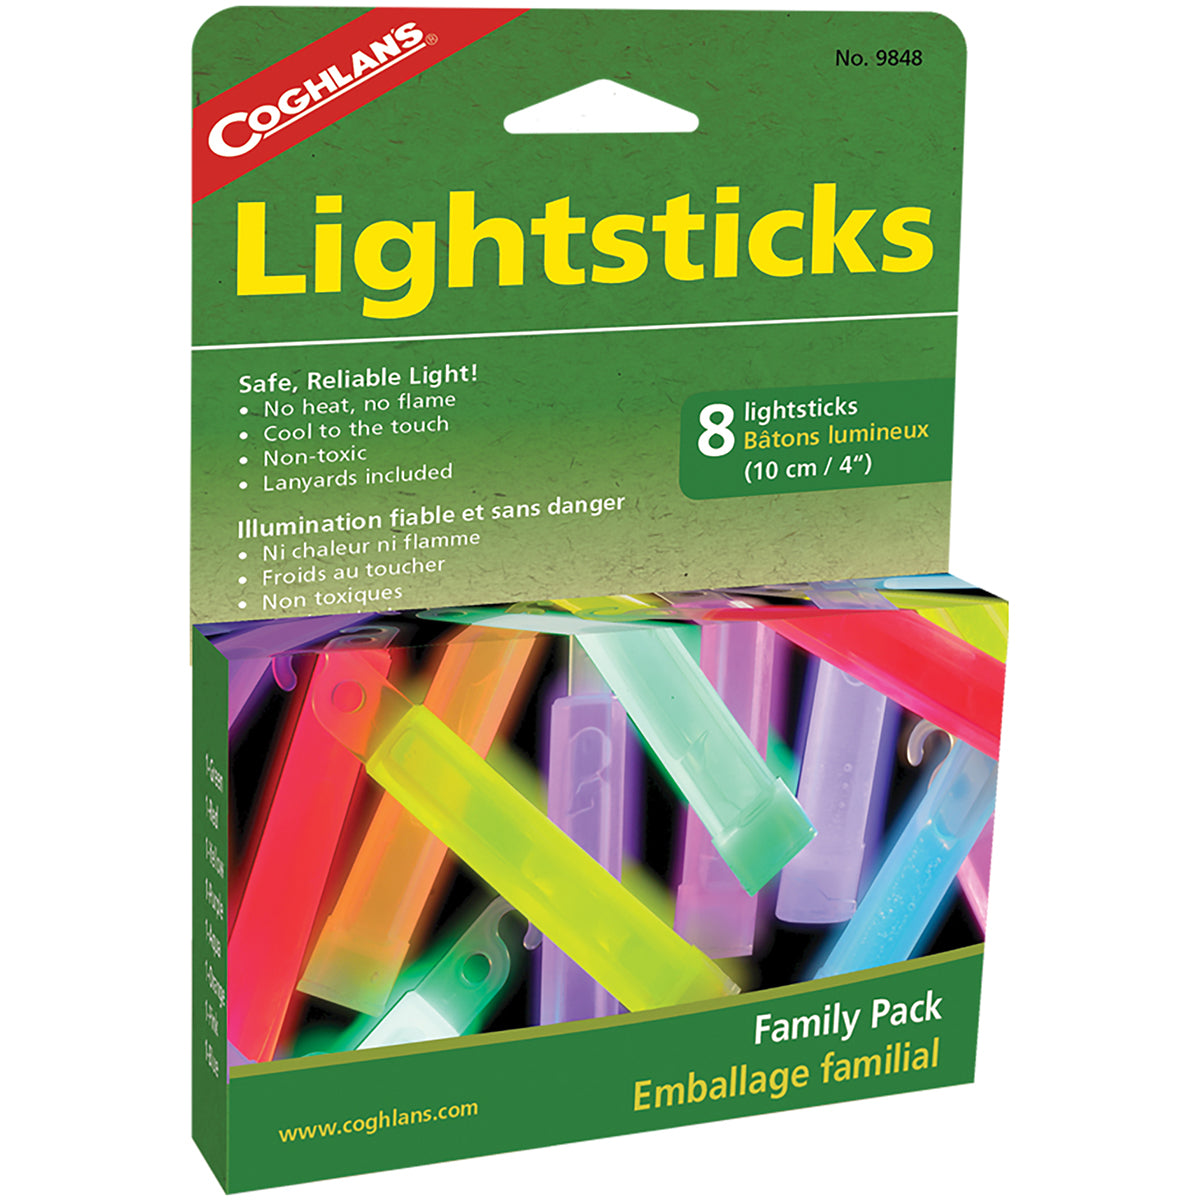 Coghlan's Lightsticks, 4" Length Family Pack (8 pieces), Lanyards Included Coghlan's